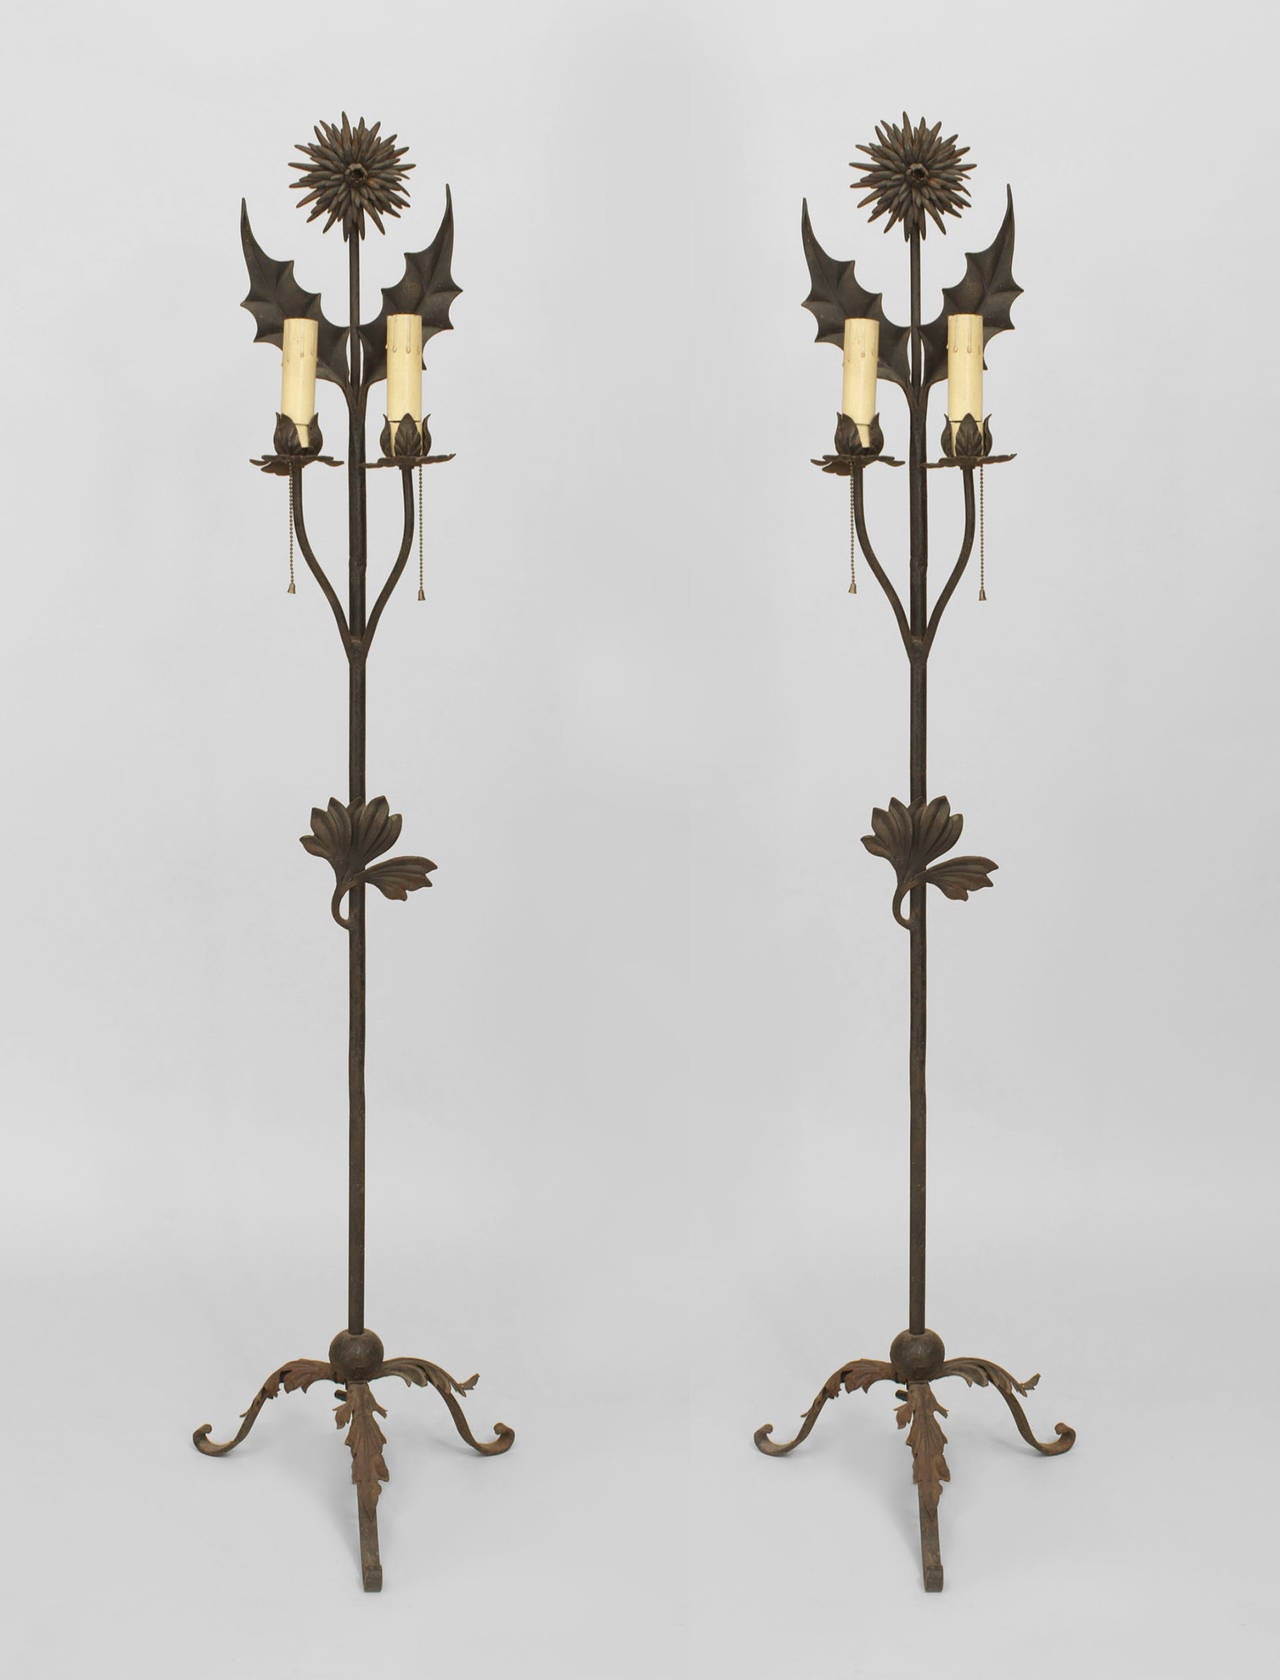 Pair of English Aesthetic Movement wrought iron 2 light floor torchieres with a leaf and floral design resting on 3 legs with a sunflower final top (PRICED AS Pair).
